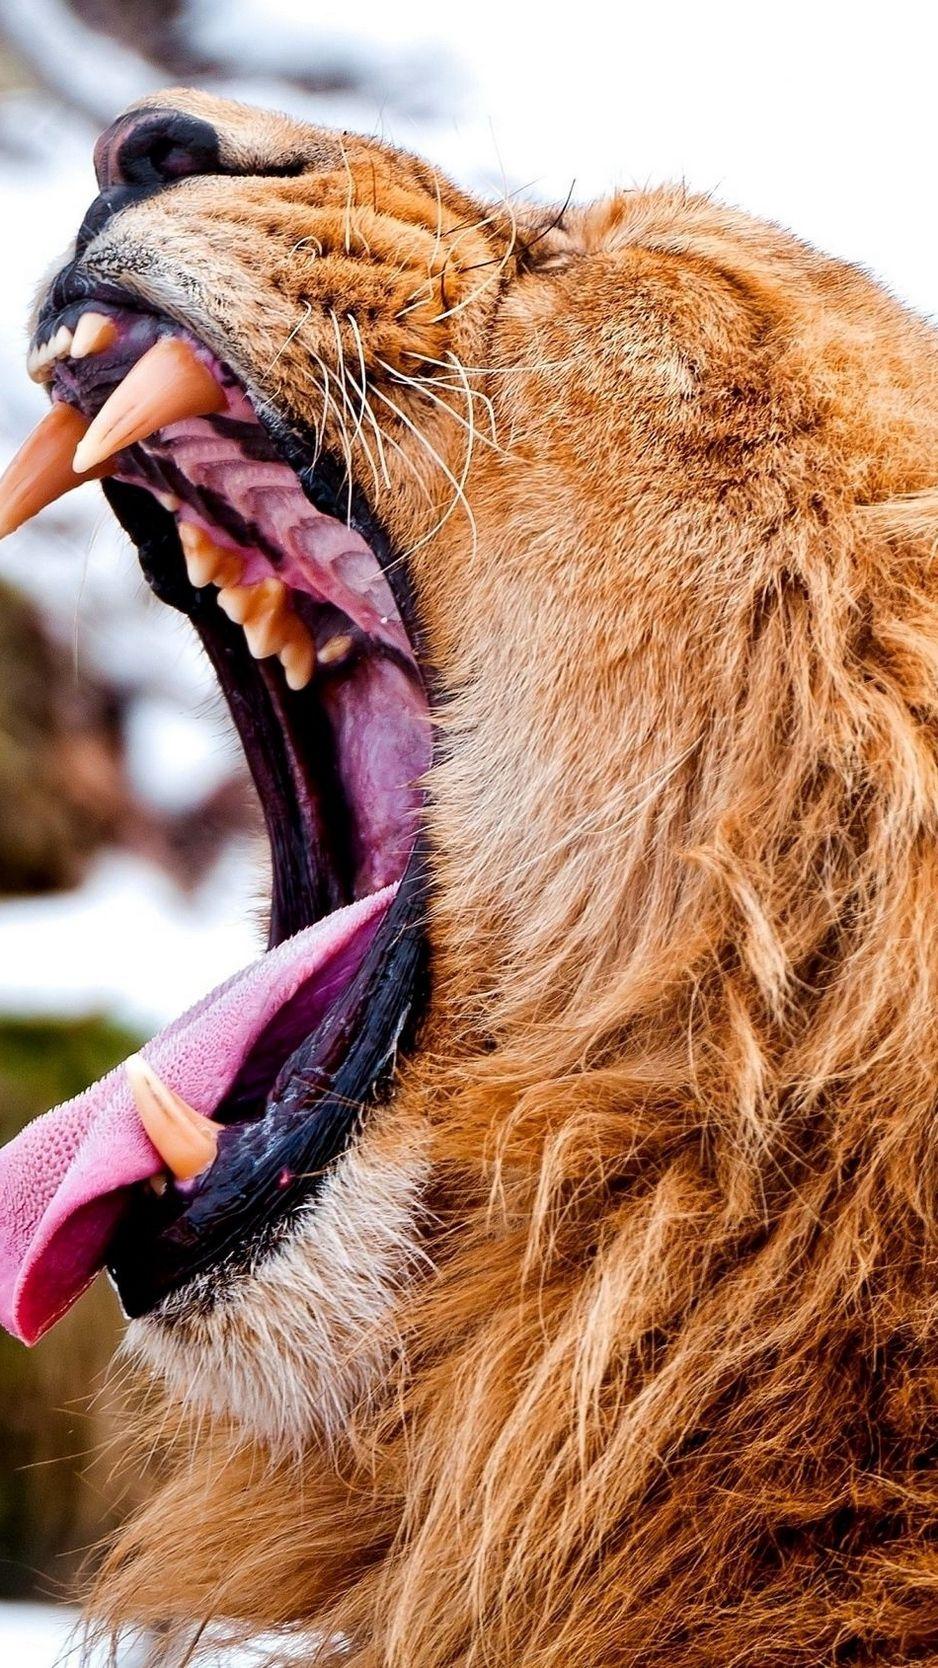 Aggressive Lion Wallpapers - Top Free Aggressive Lion Backgrounds